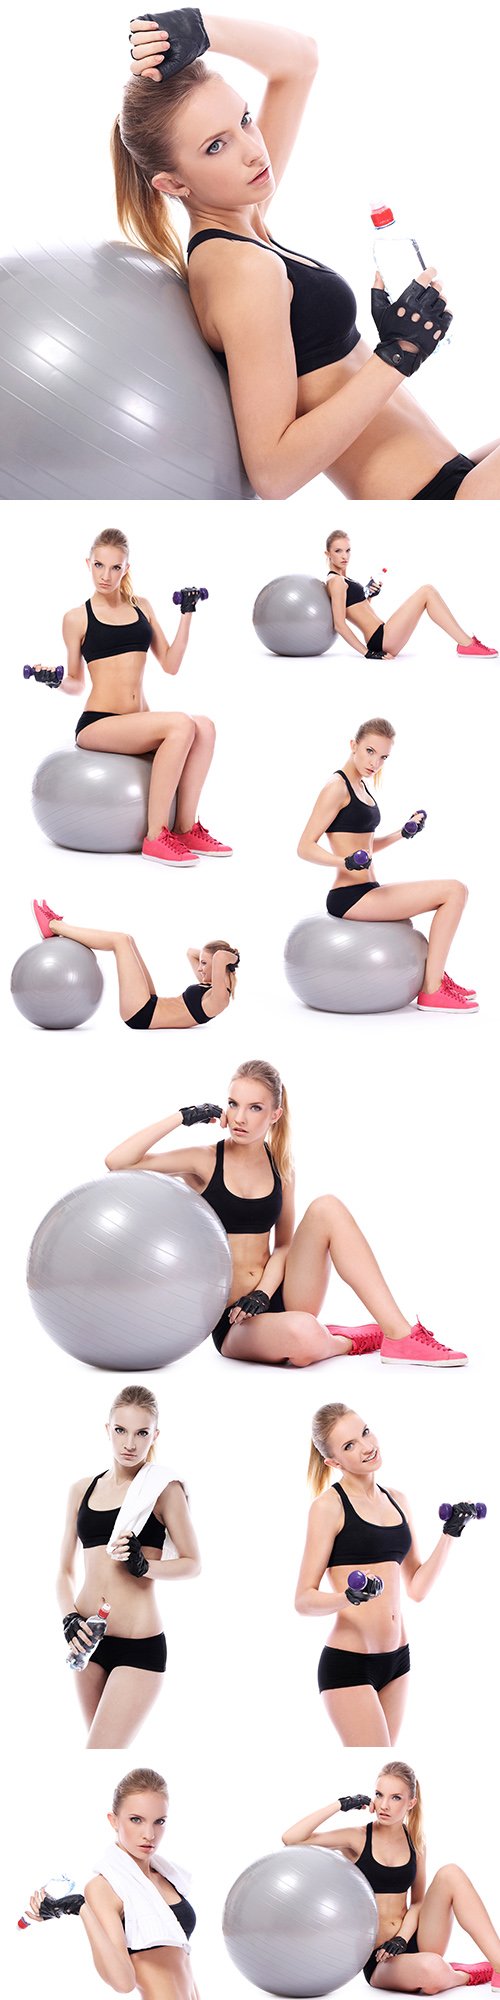 Woman does exercises with gantels on fitness ball